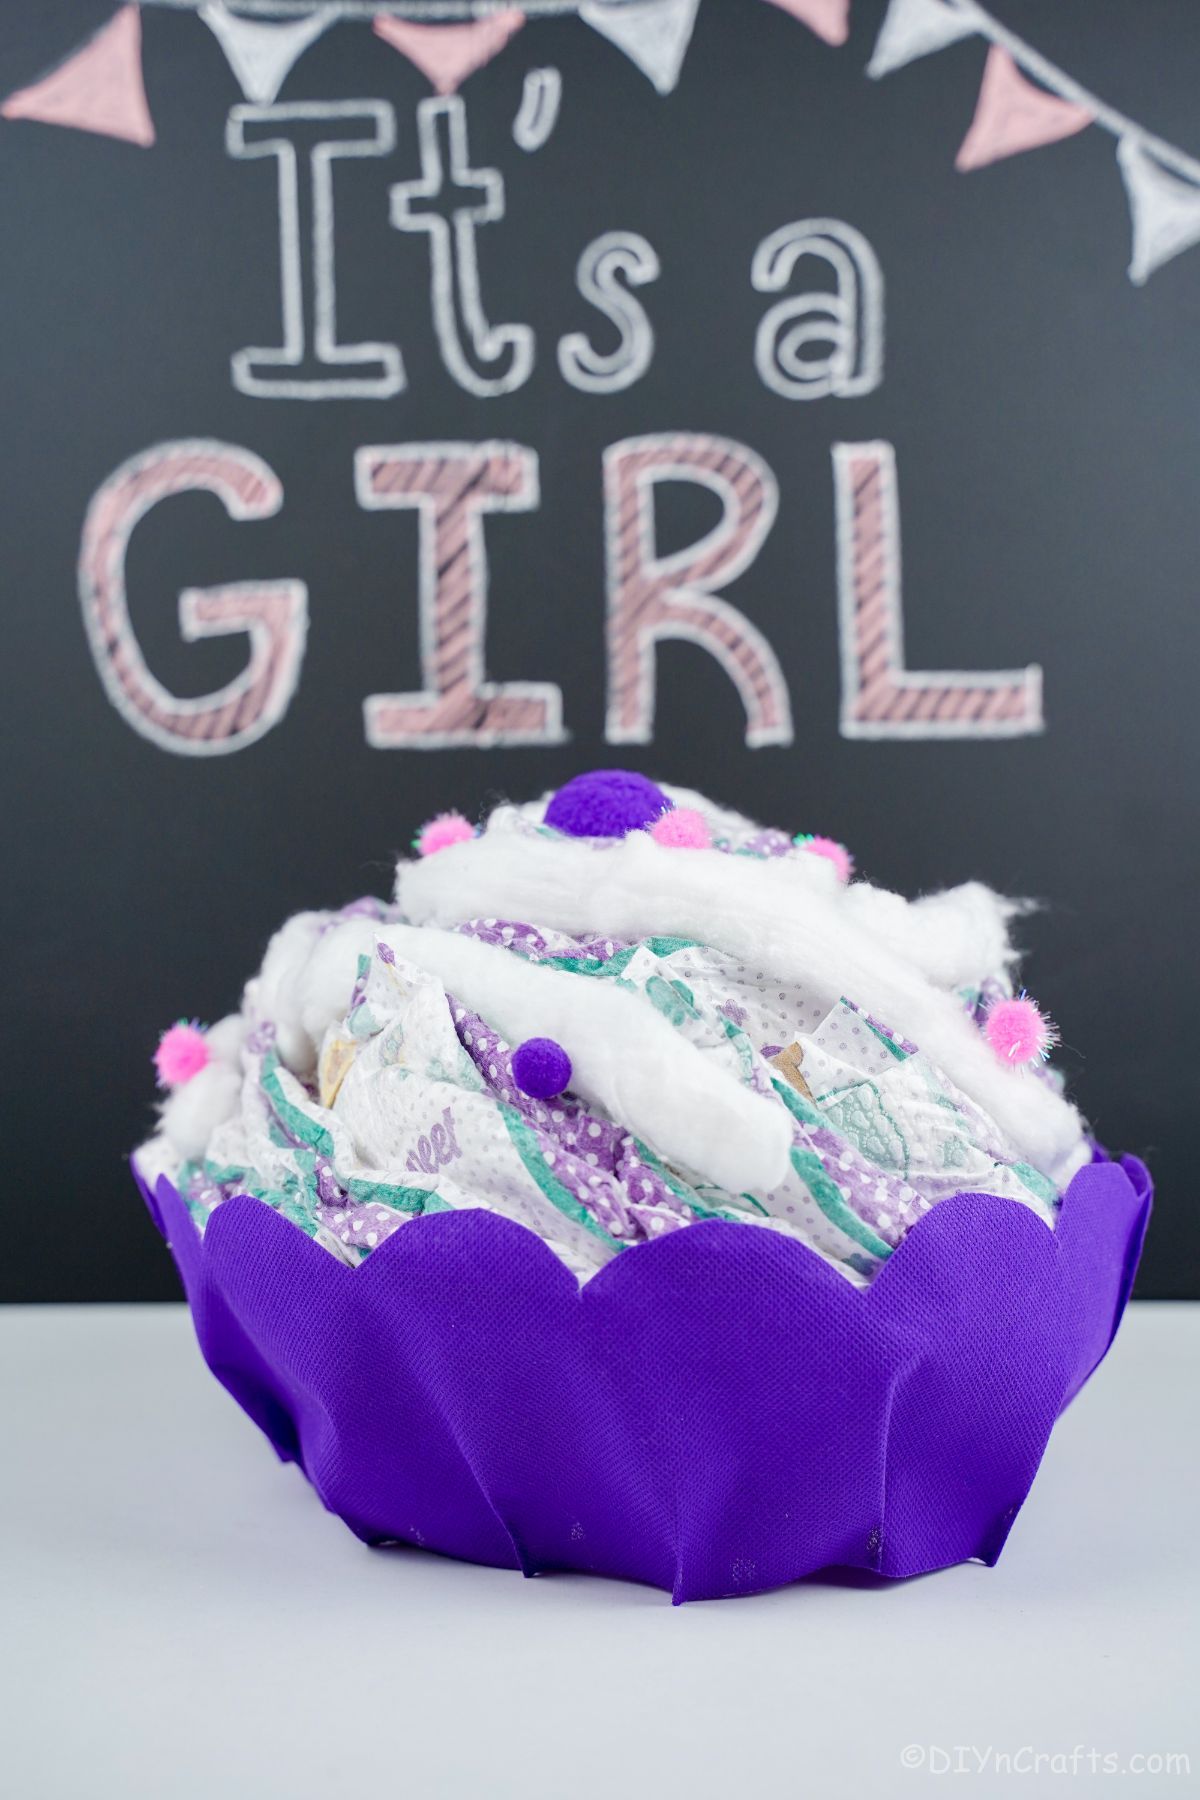 purple cupcake diaper on table with chalkboard sign in background